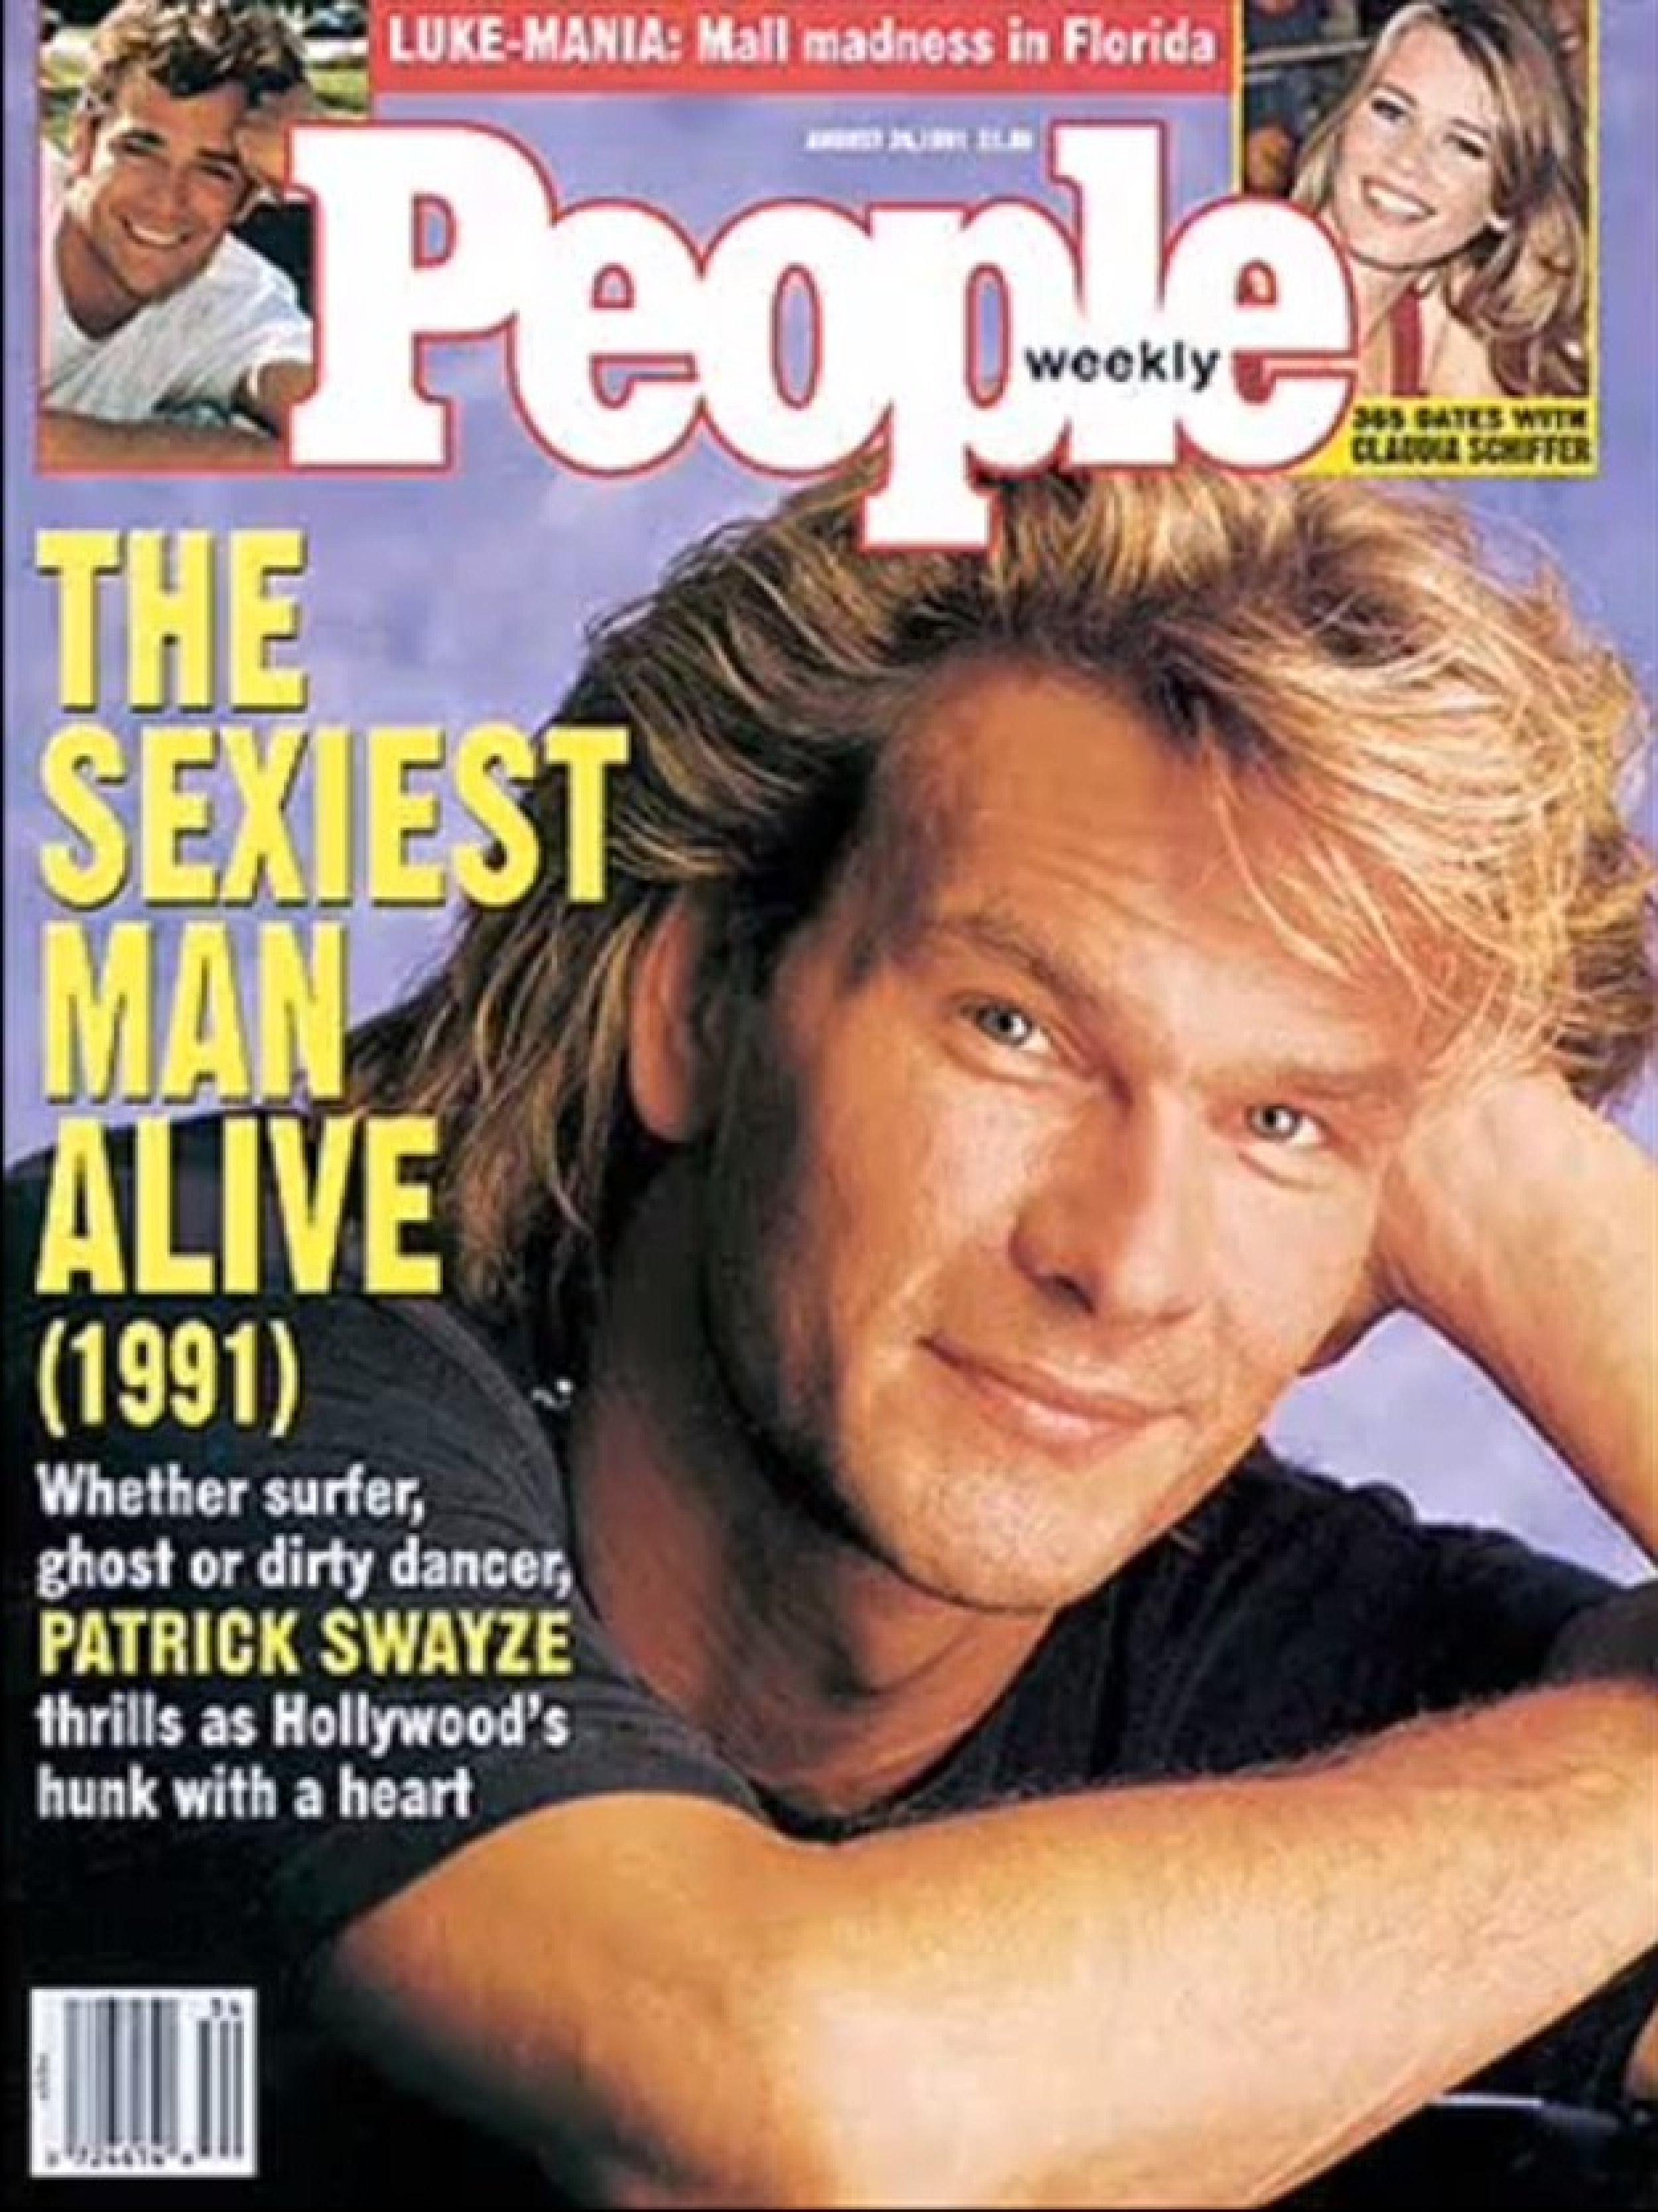 People S Sexiest Man Alive Winners From The Past 20 Years [photos]